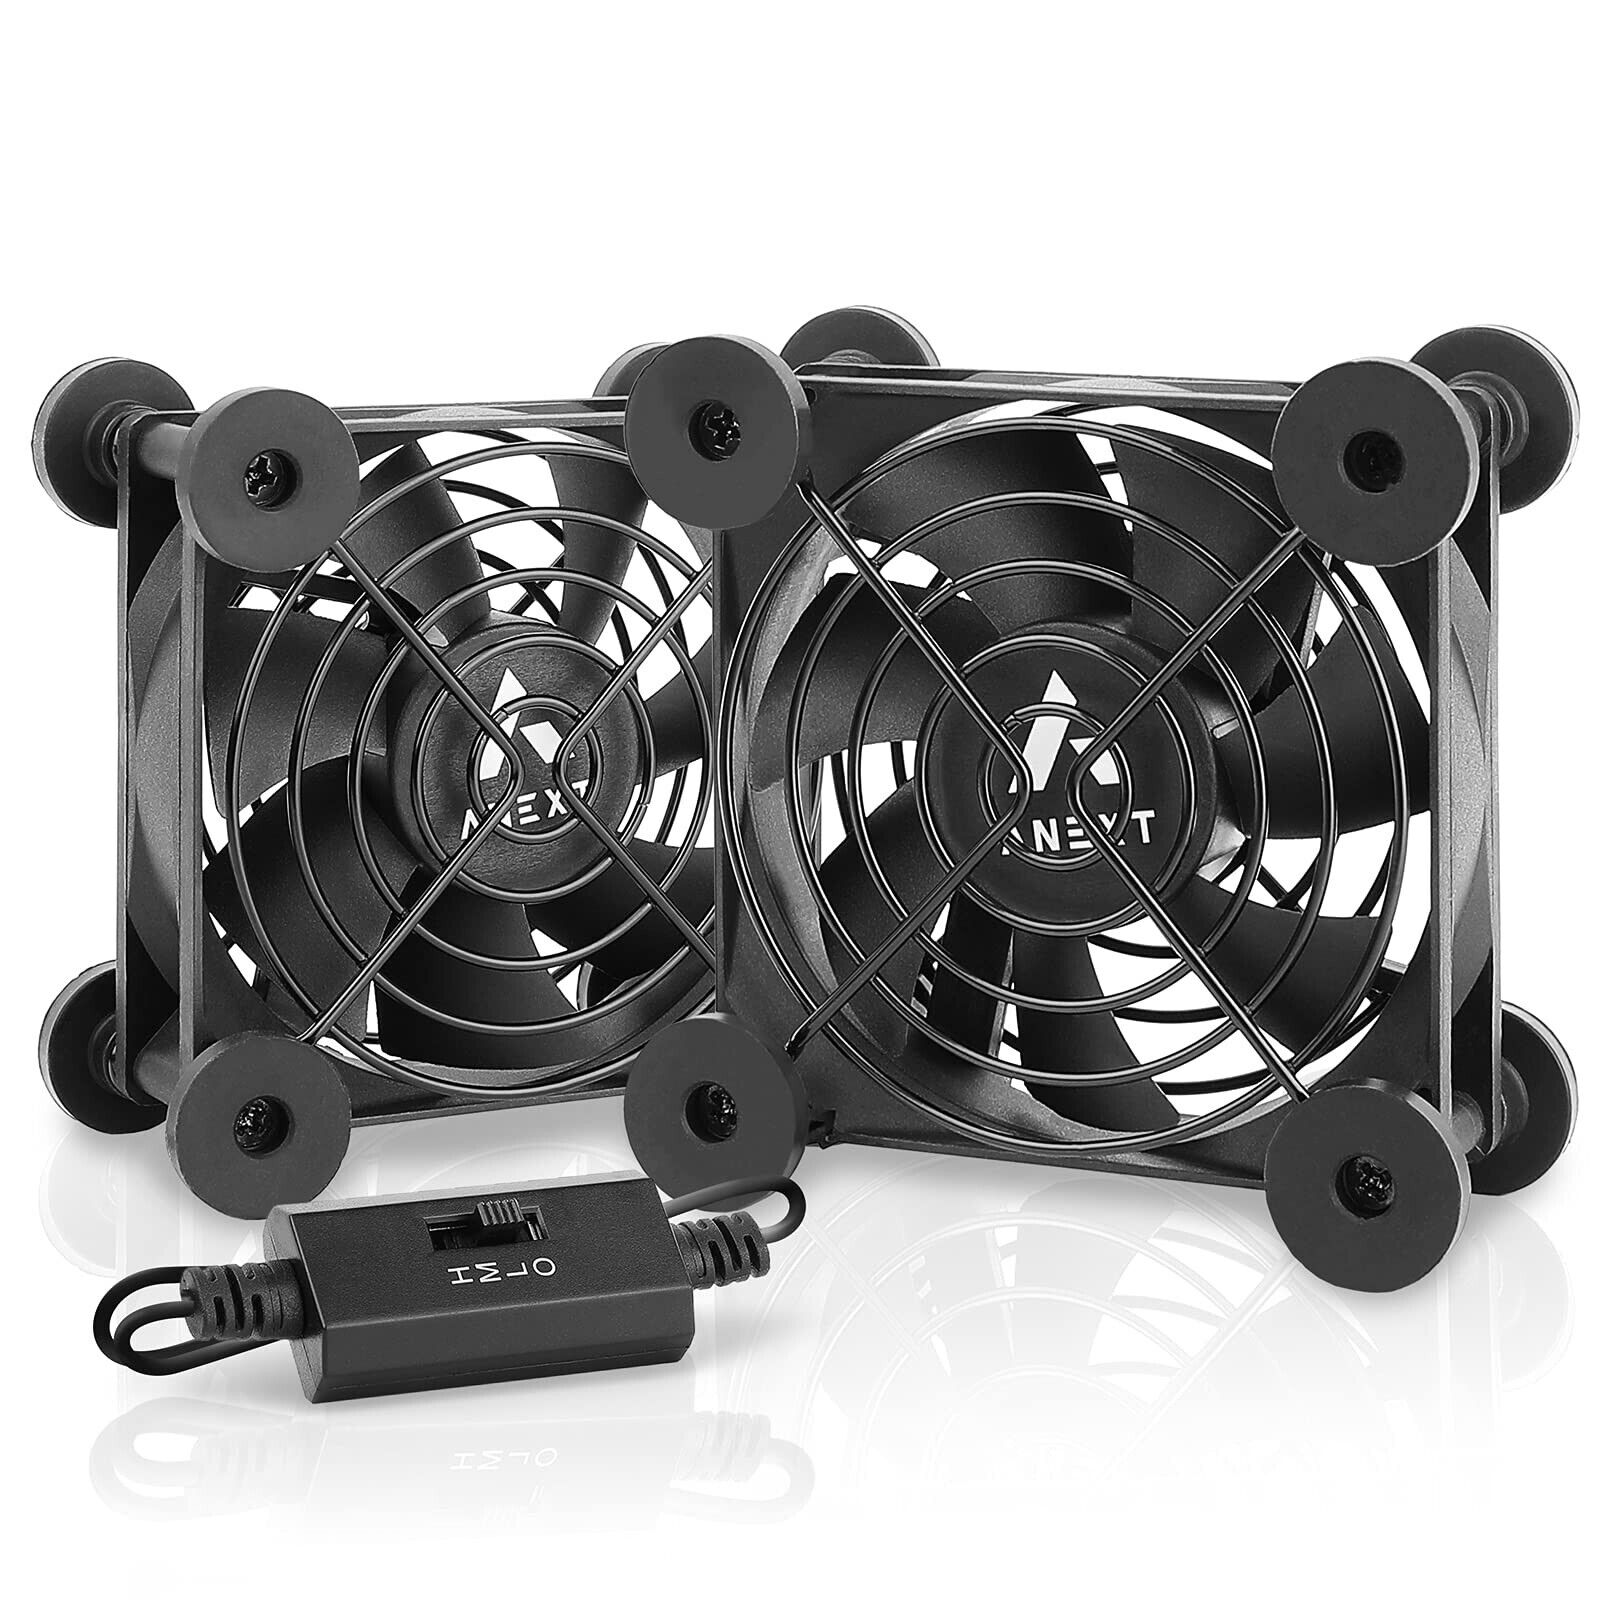 80mm USB Computer Fan 2-Pack, Silent Cooling for DVR, PlayStation, Xbox, PC Cabi